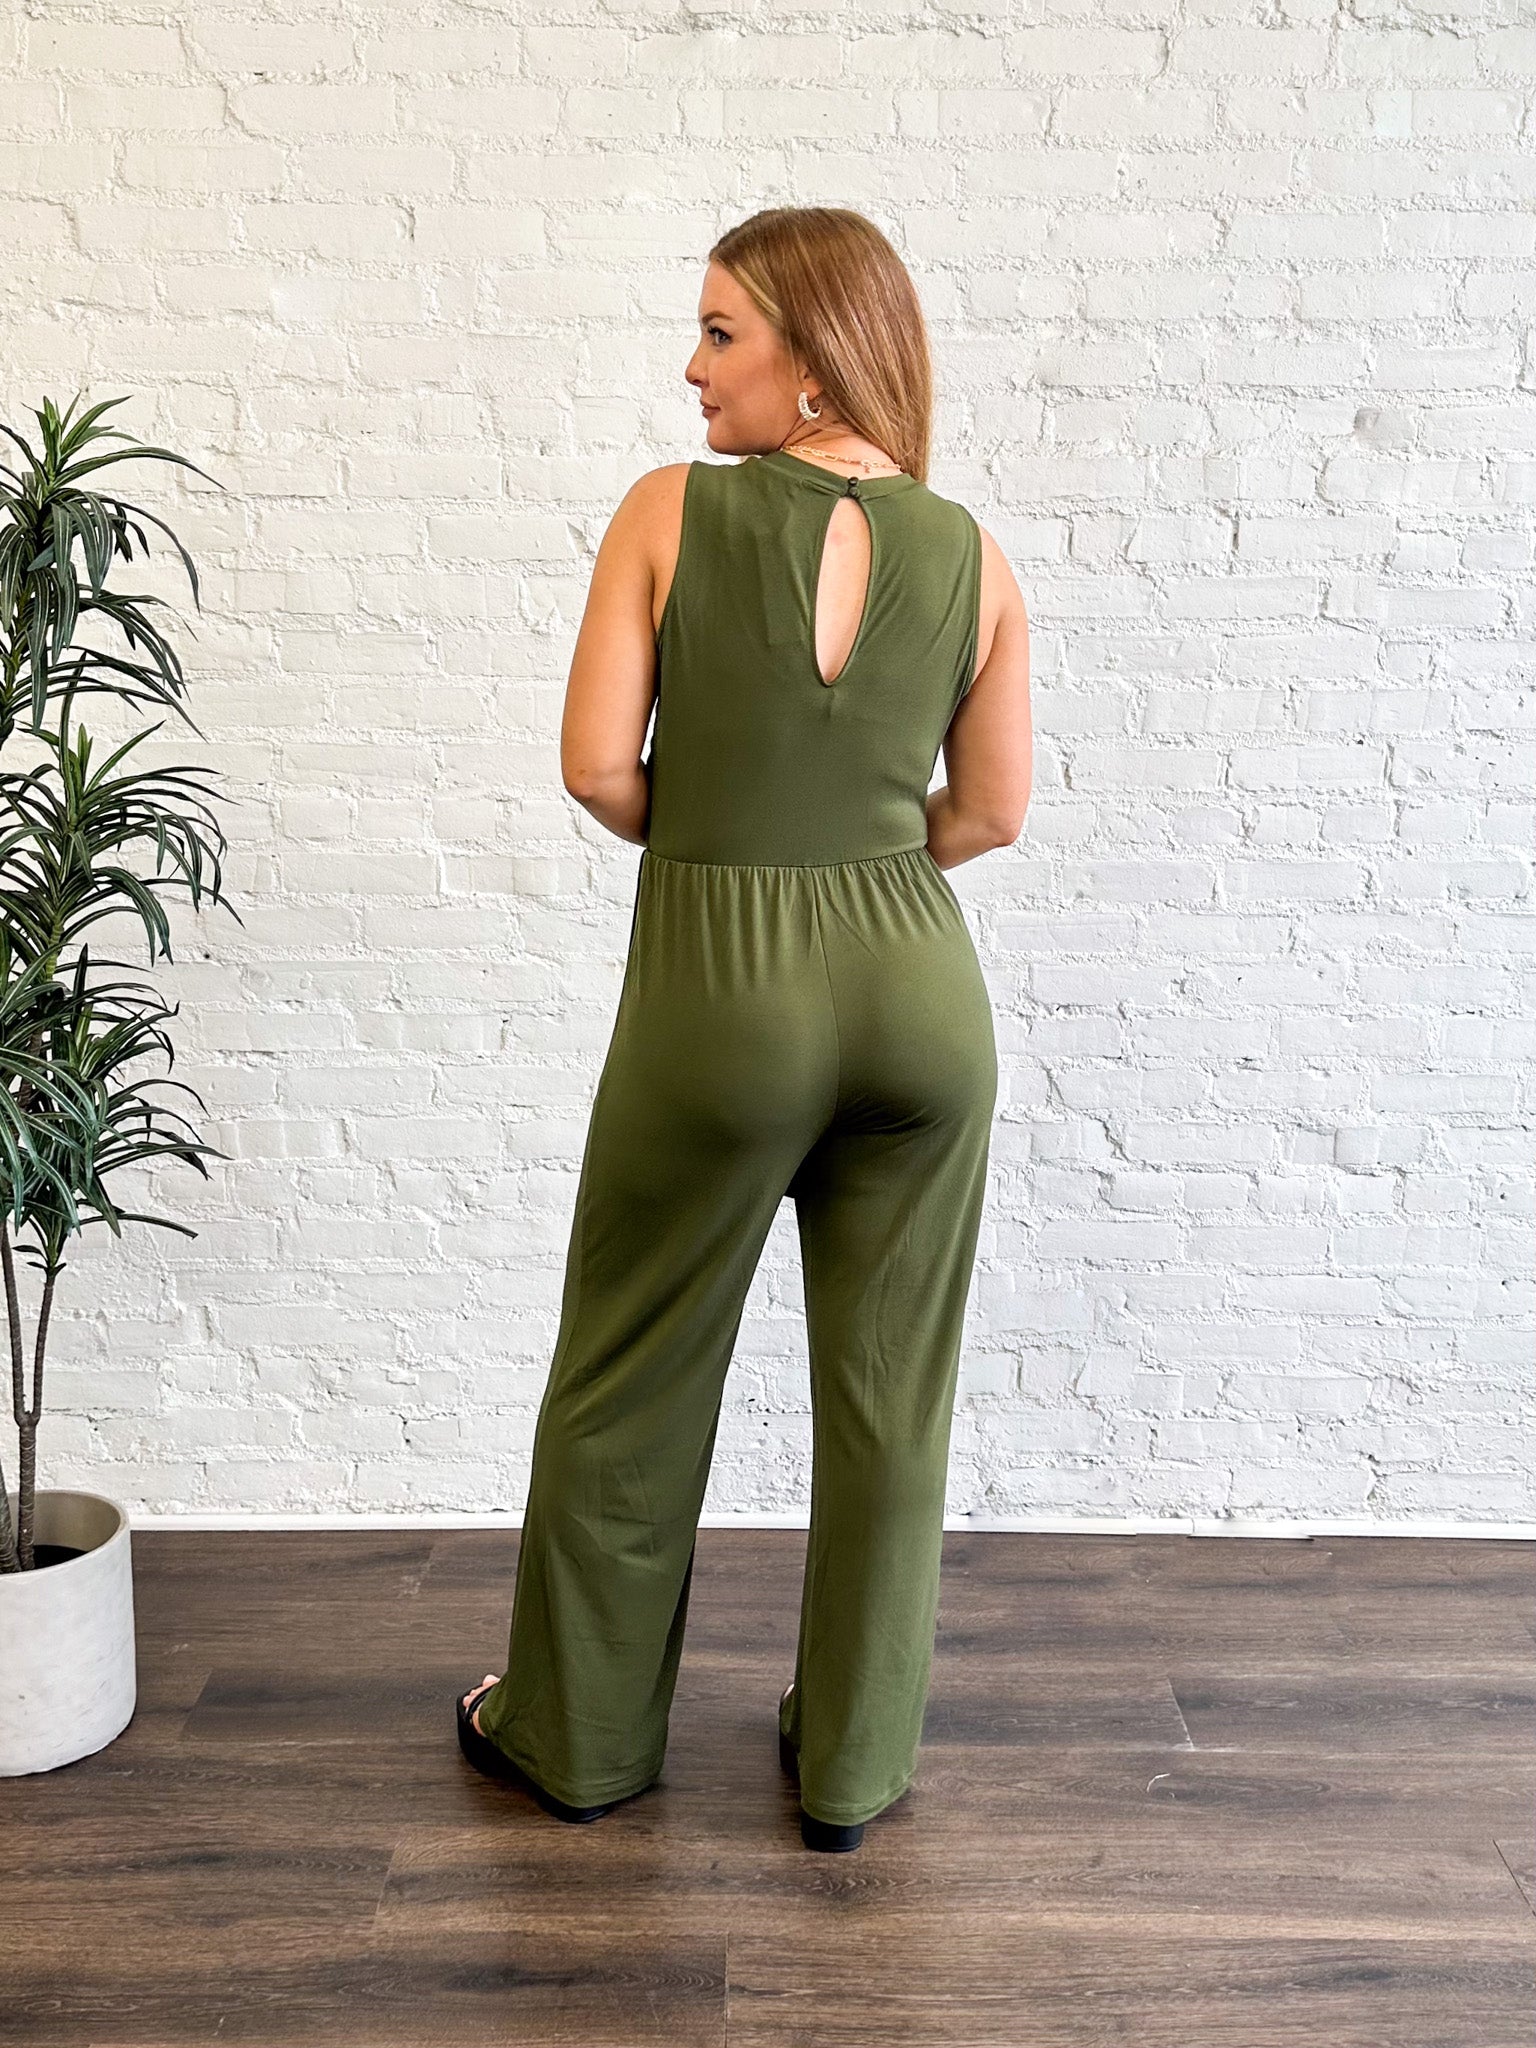 Home Alone Jumpsuit